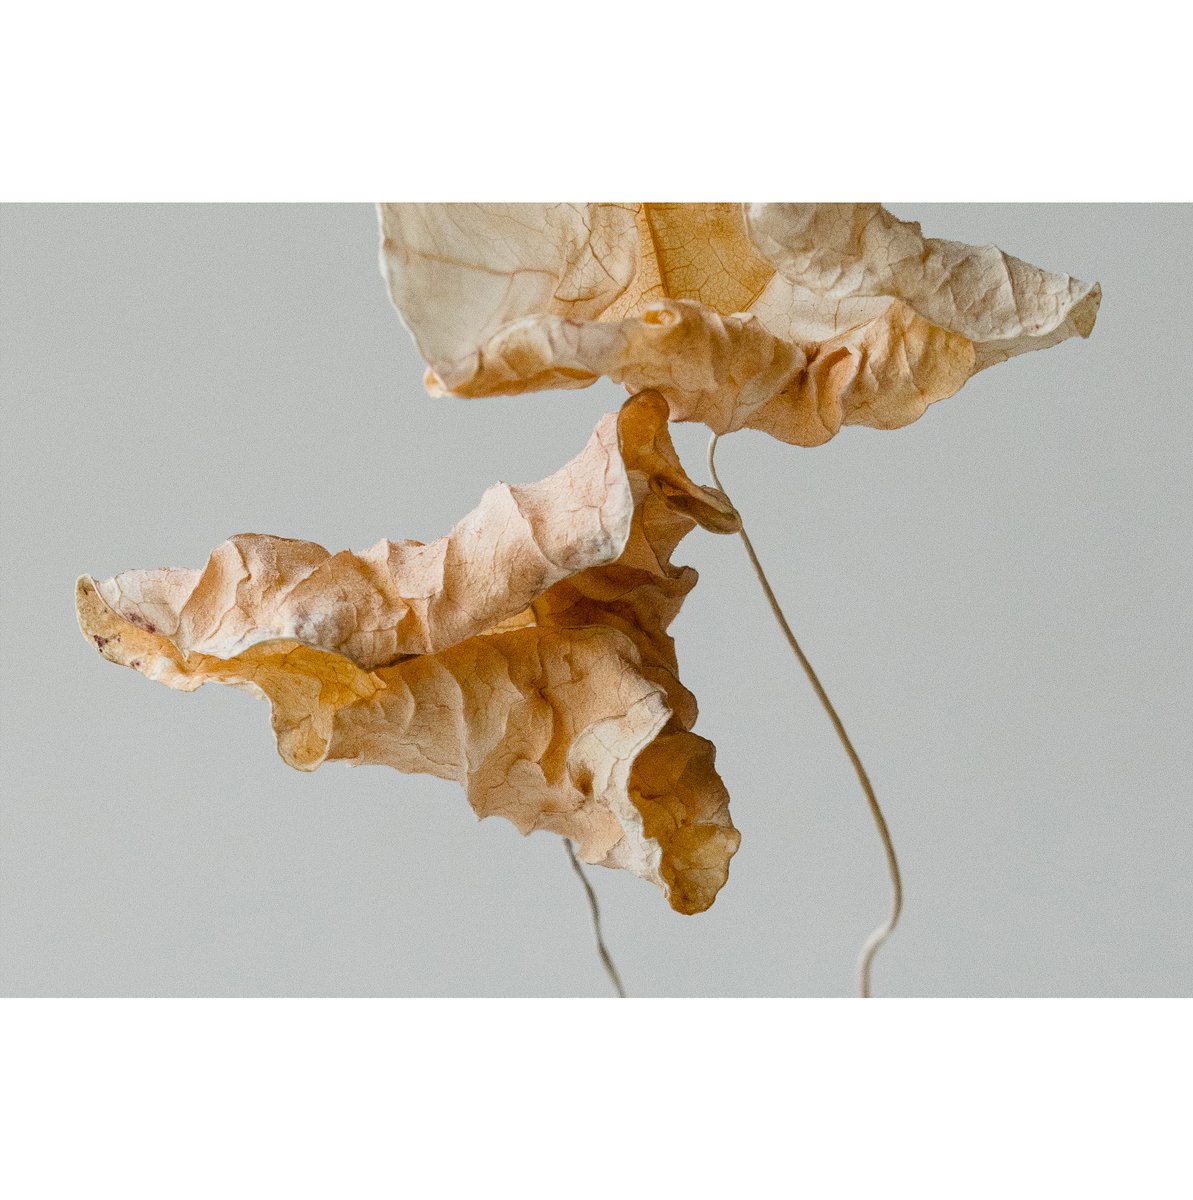  Personal Work
A close-up image of two dried nasturtium leaves against a grey/beige background. by Sydney SG